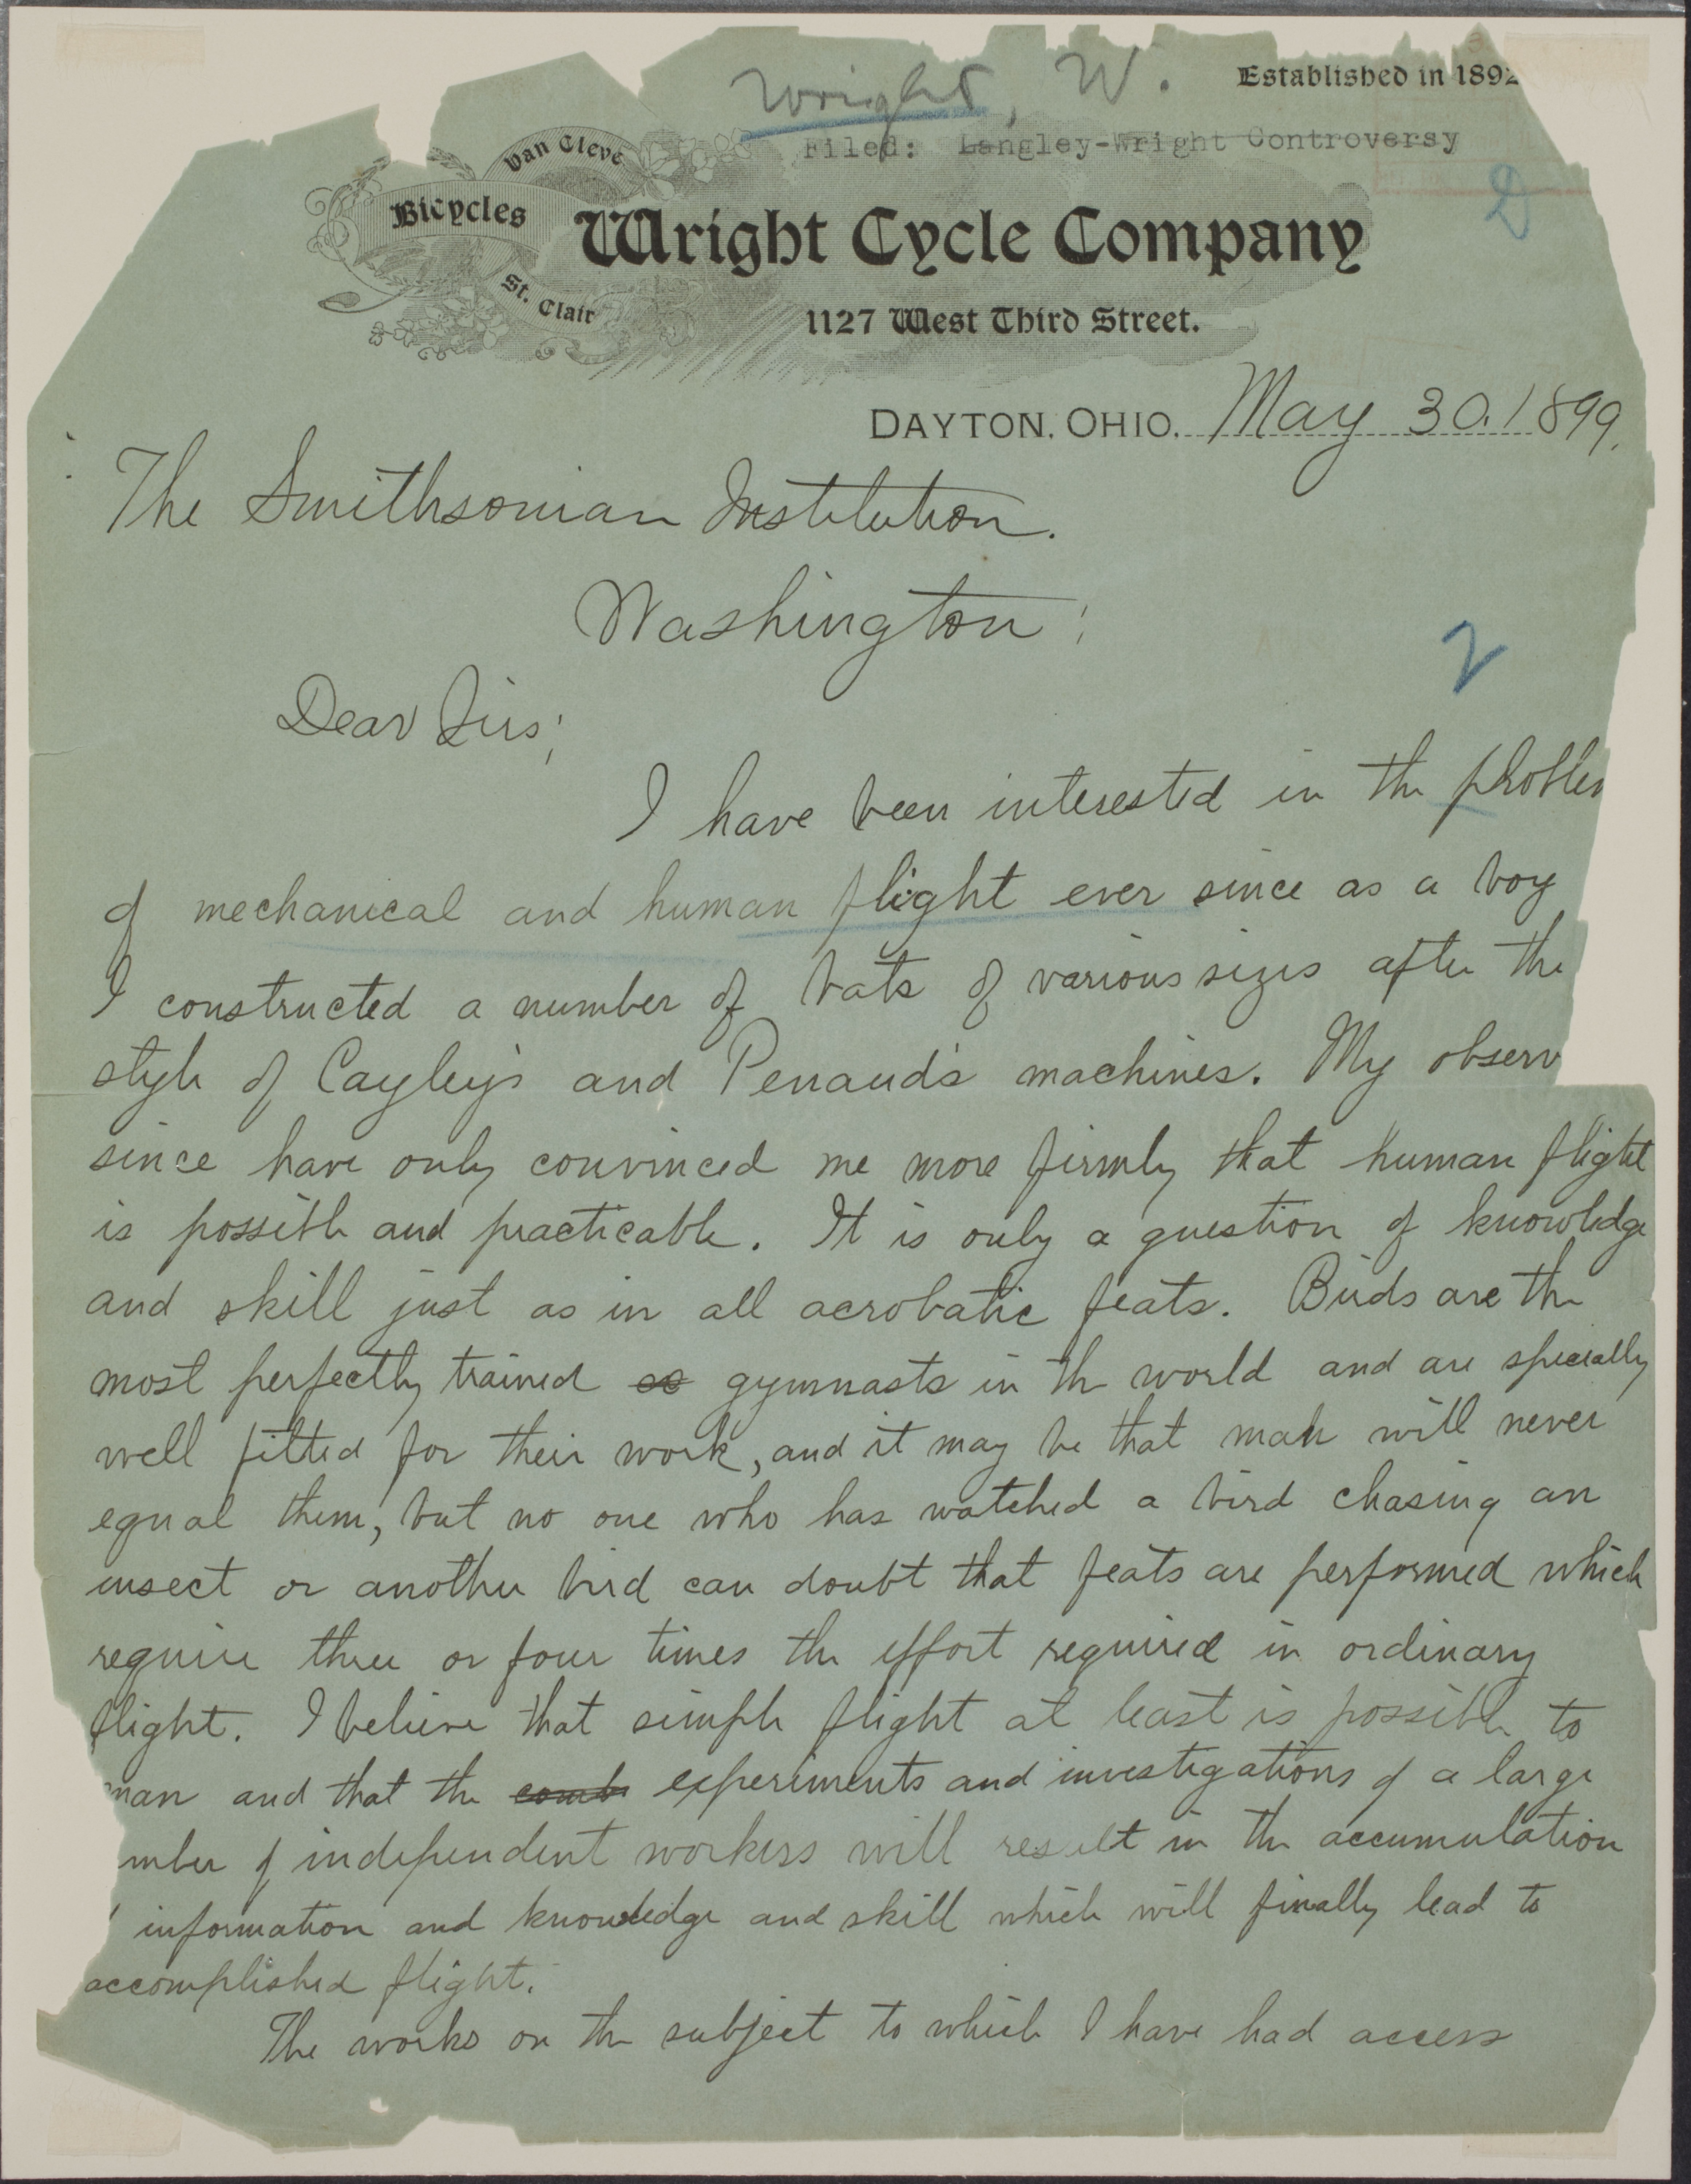 Letter from the Wright brothers to the Smithsonian Institution, May 30, 1899.